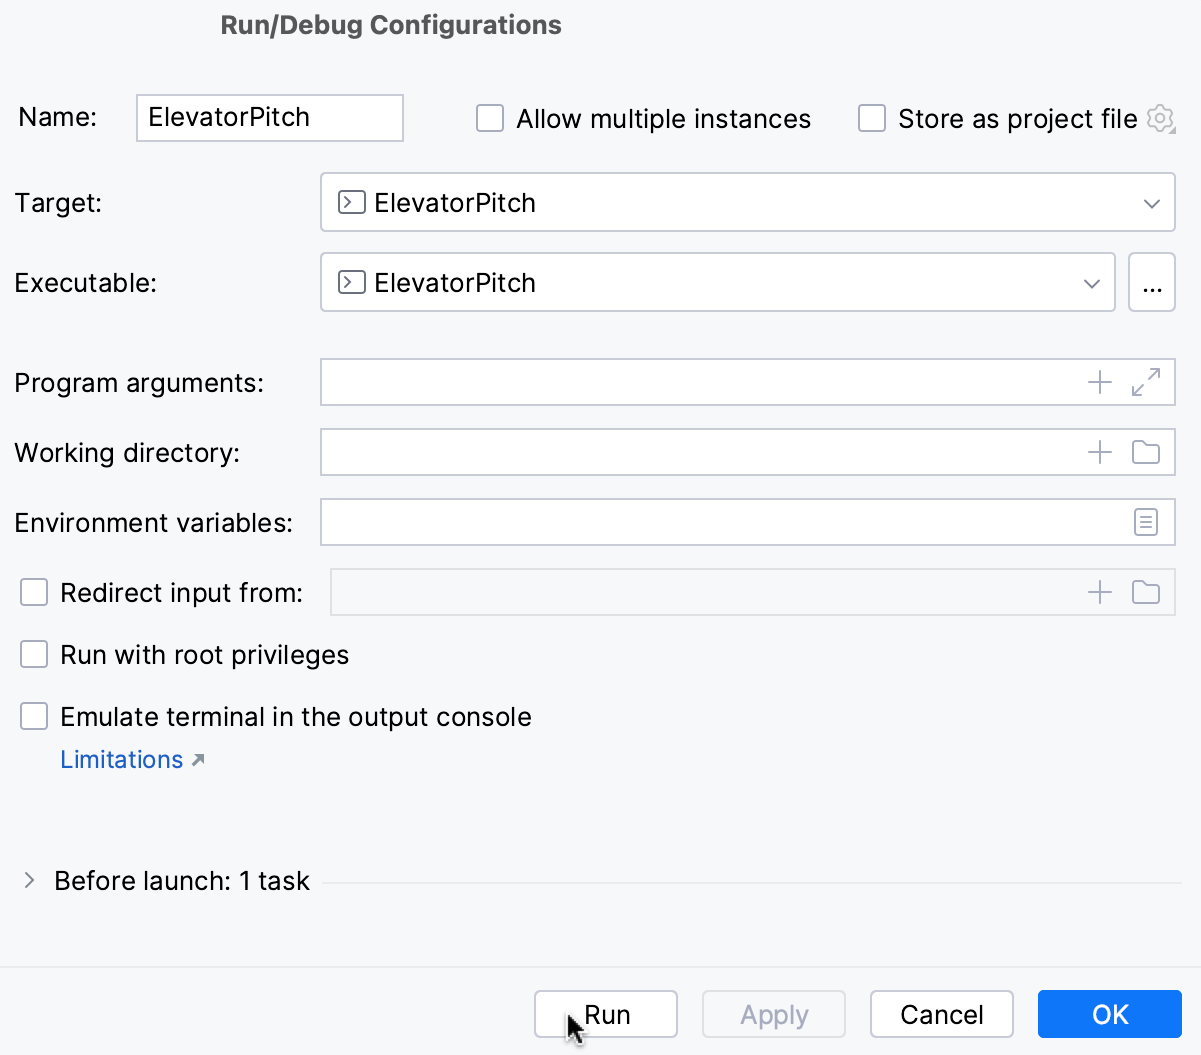 Run button in the Edit Configurations dialog